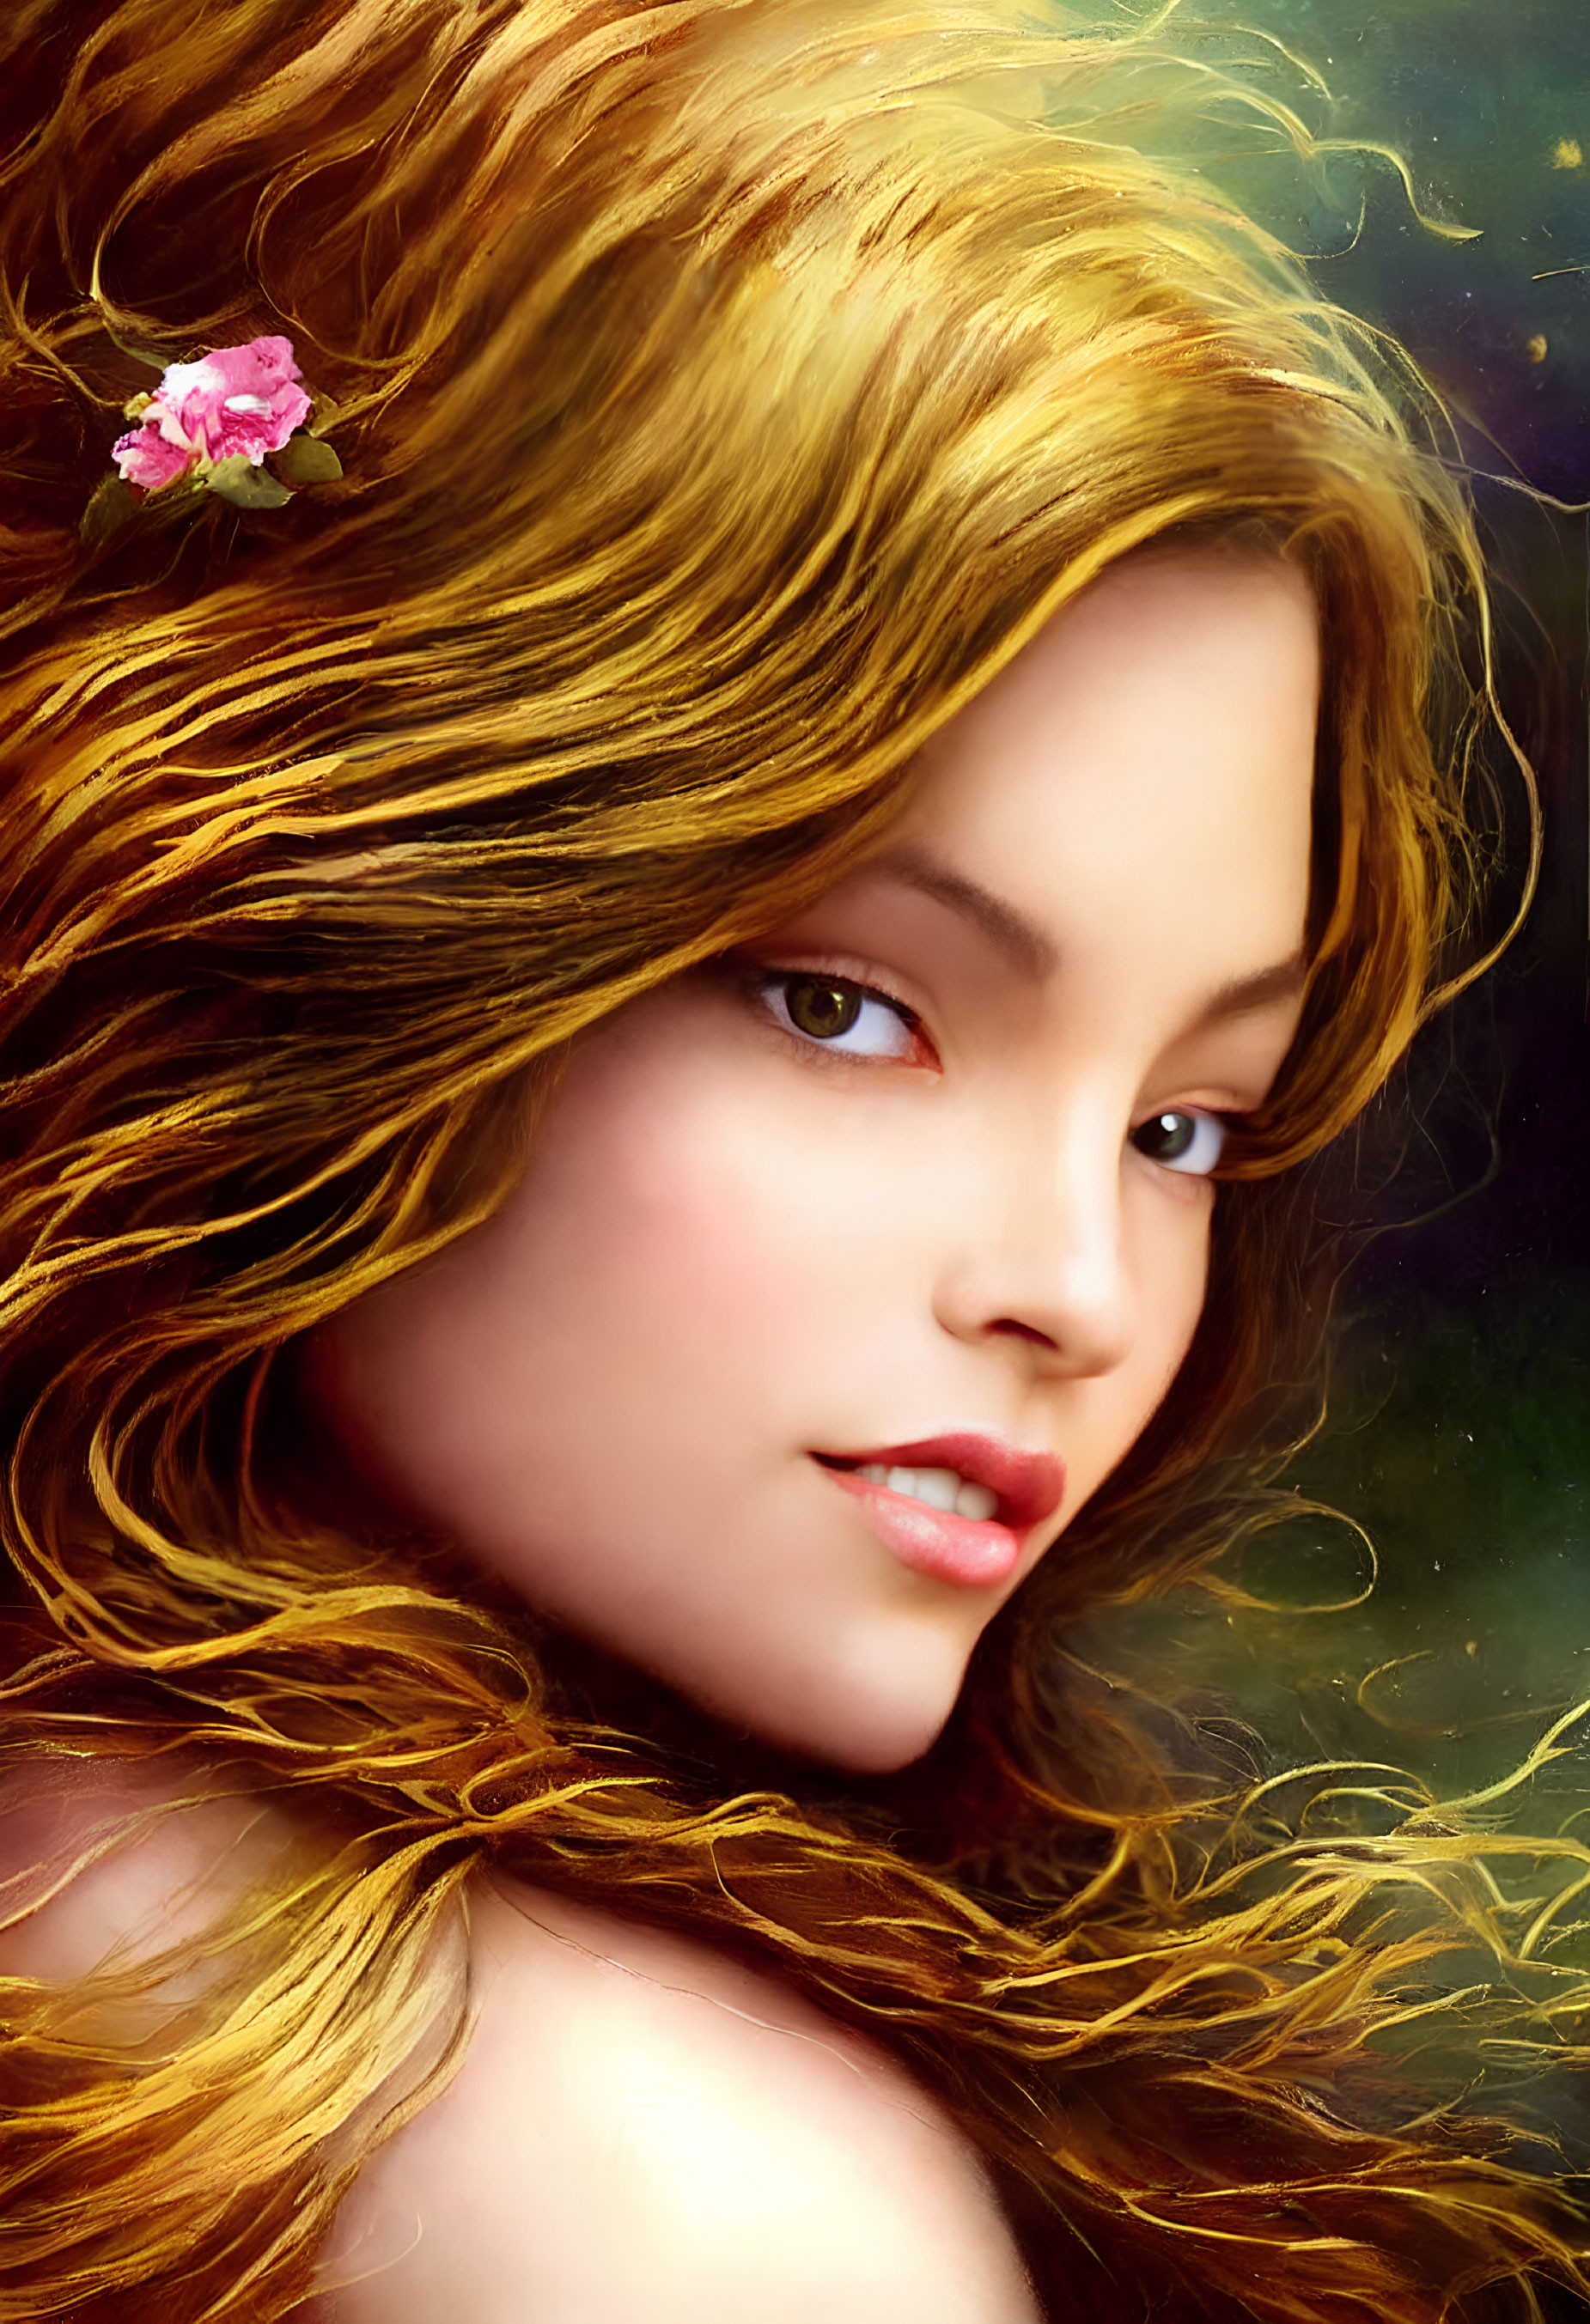 Golden-haired woman with pink flower in digital portrait